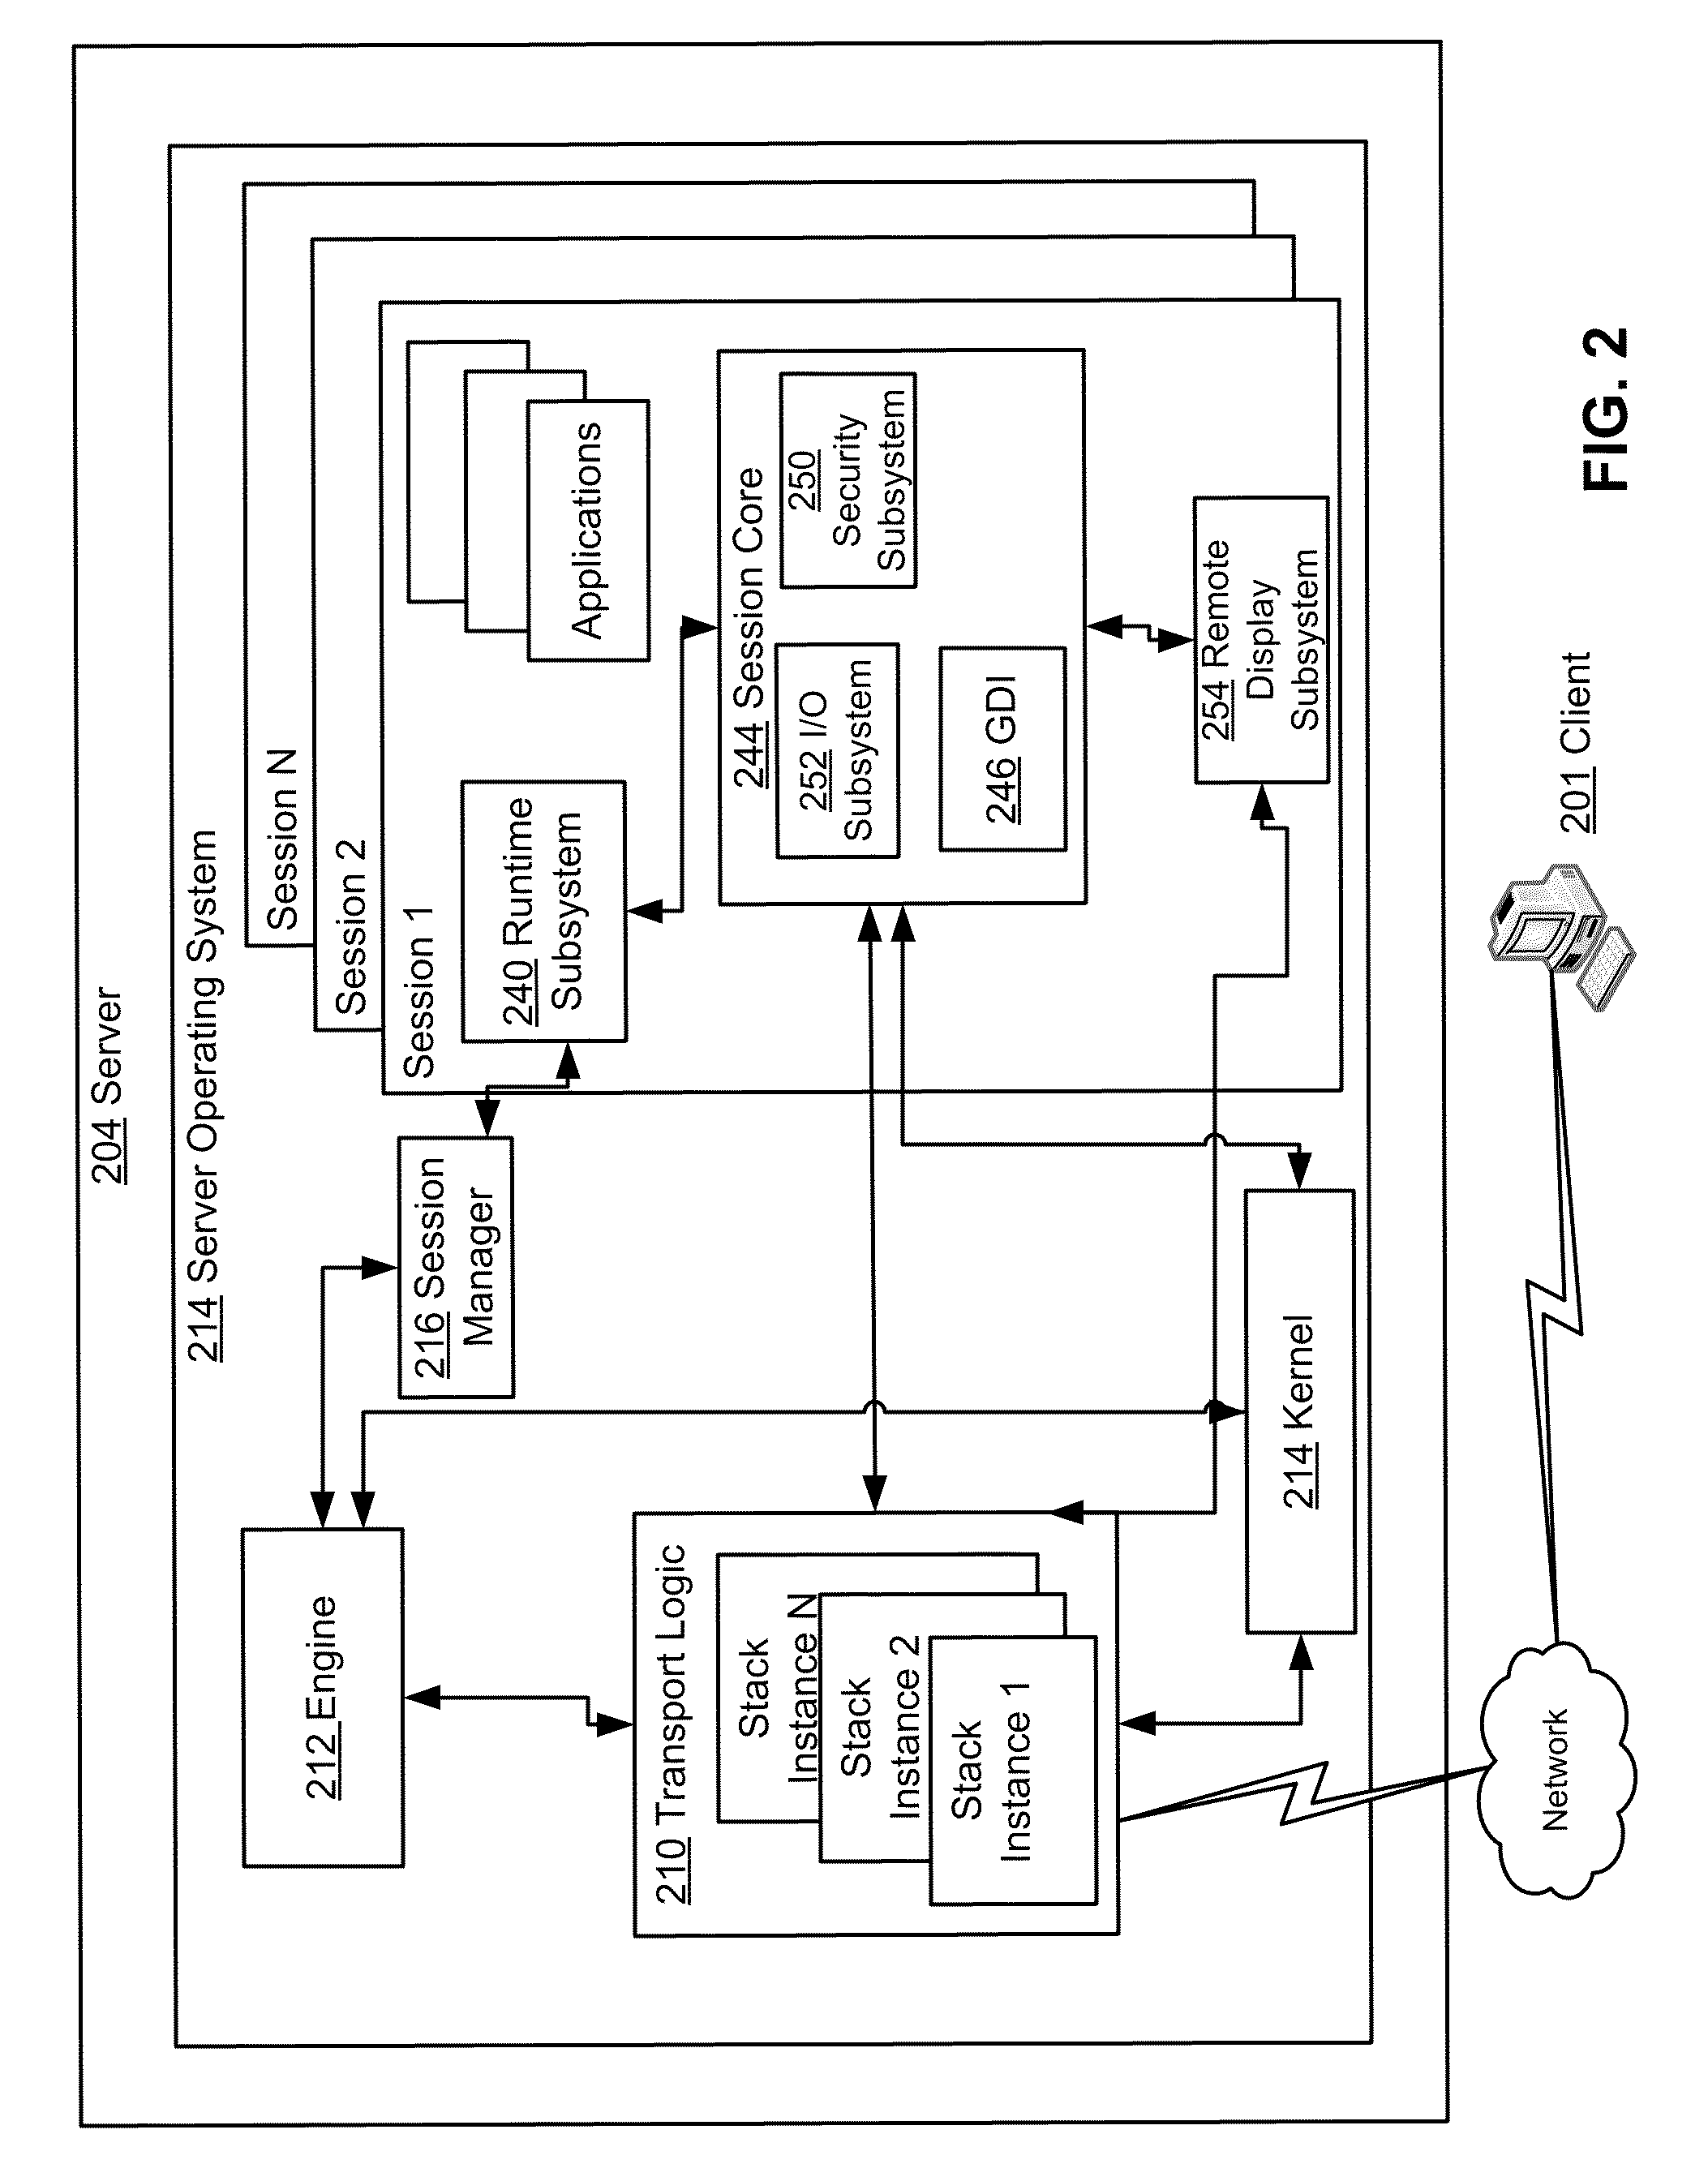 Terminal services application virtualization for compatability